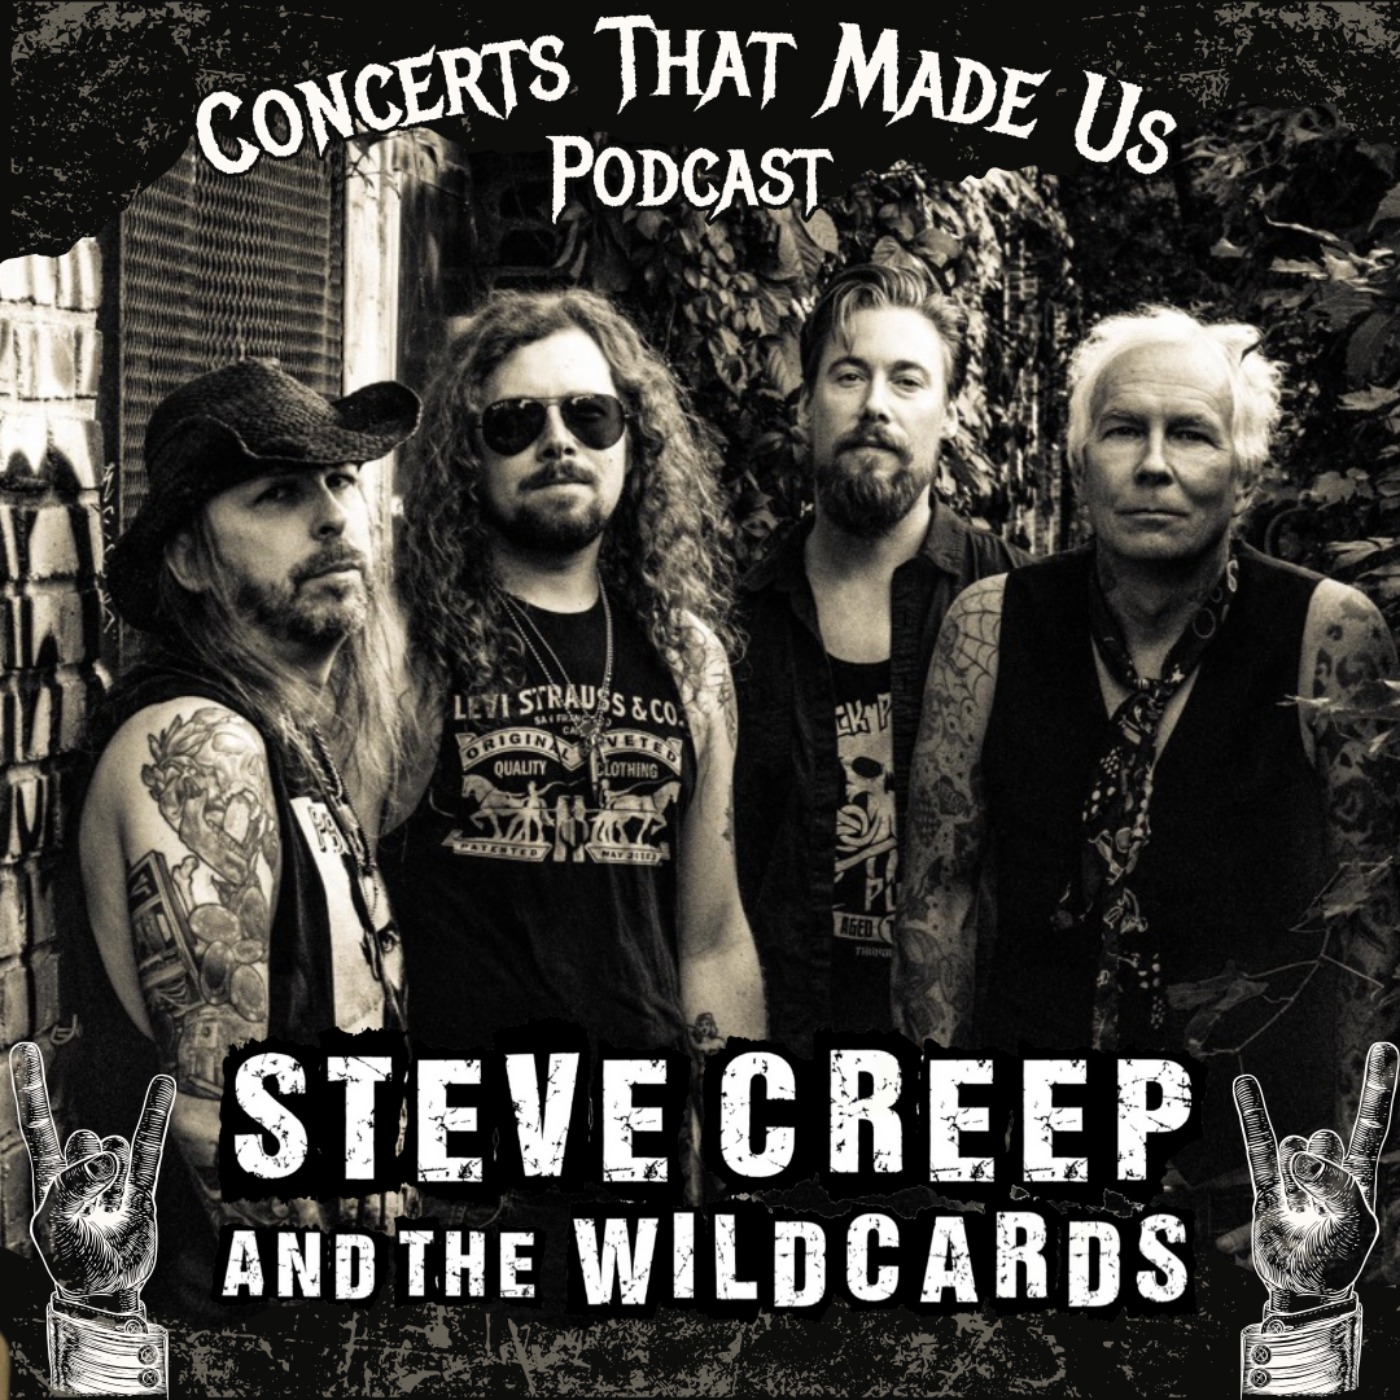 Steve Creep and The Wildcards